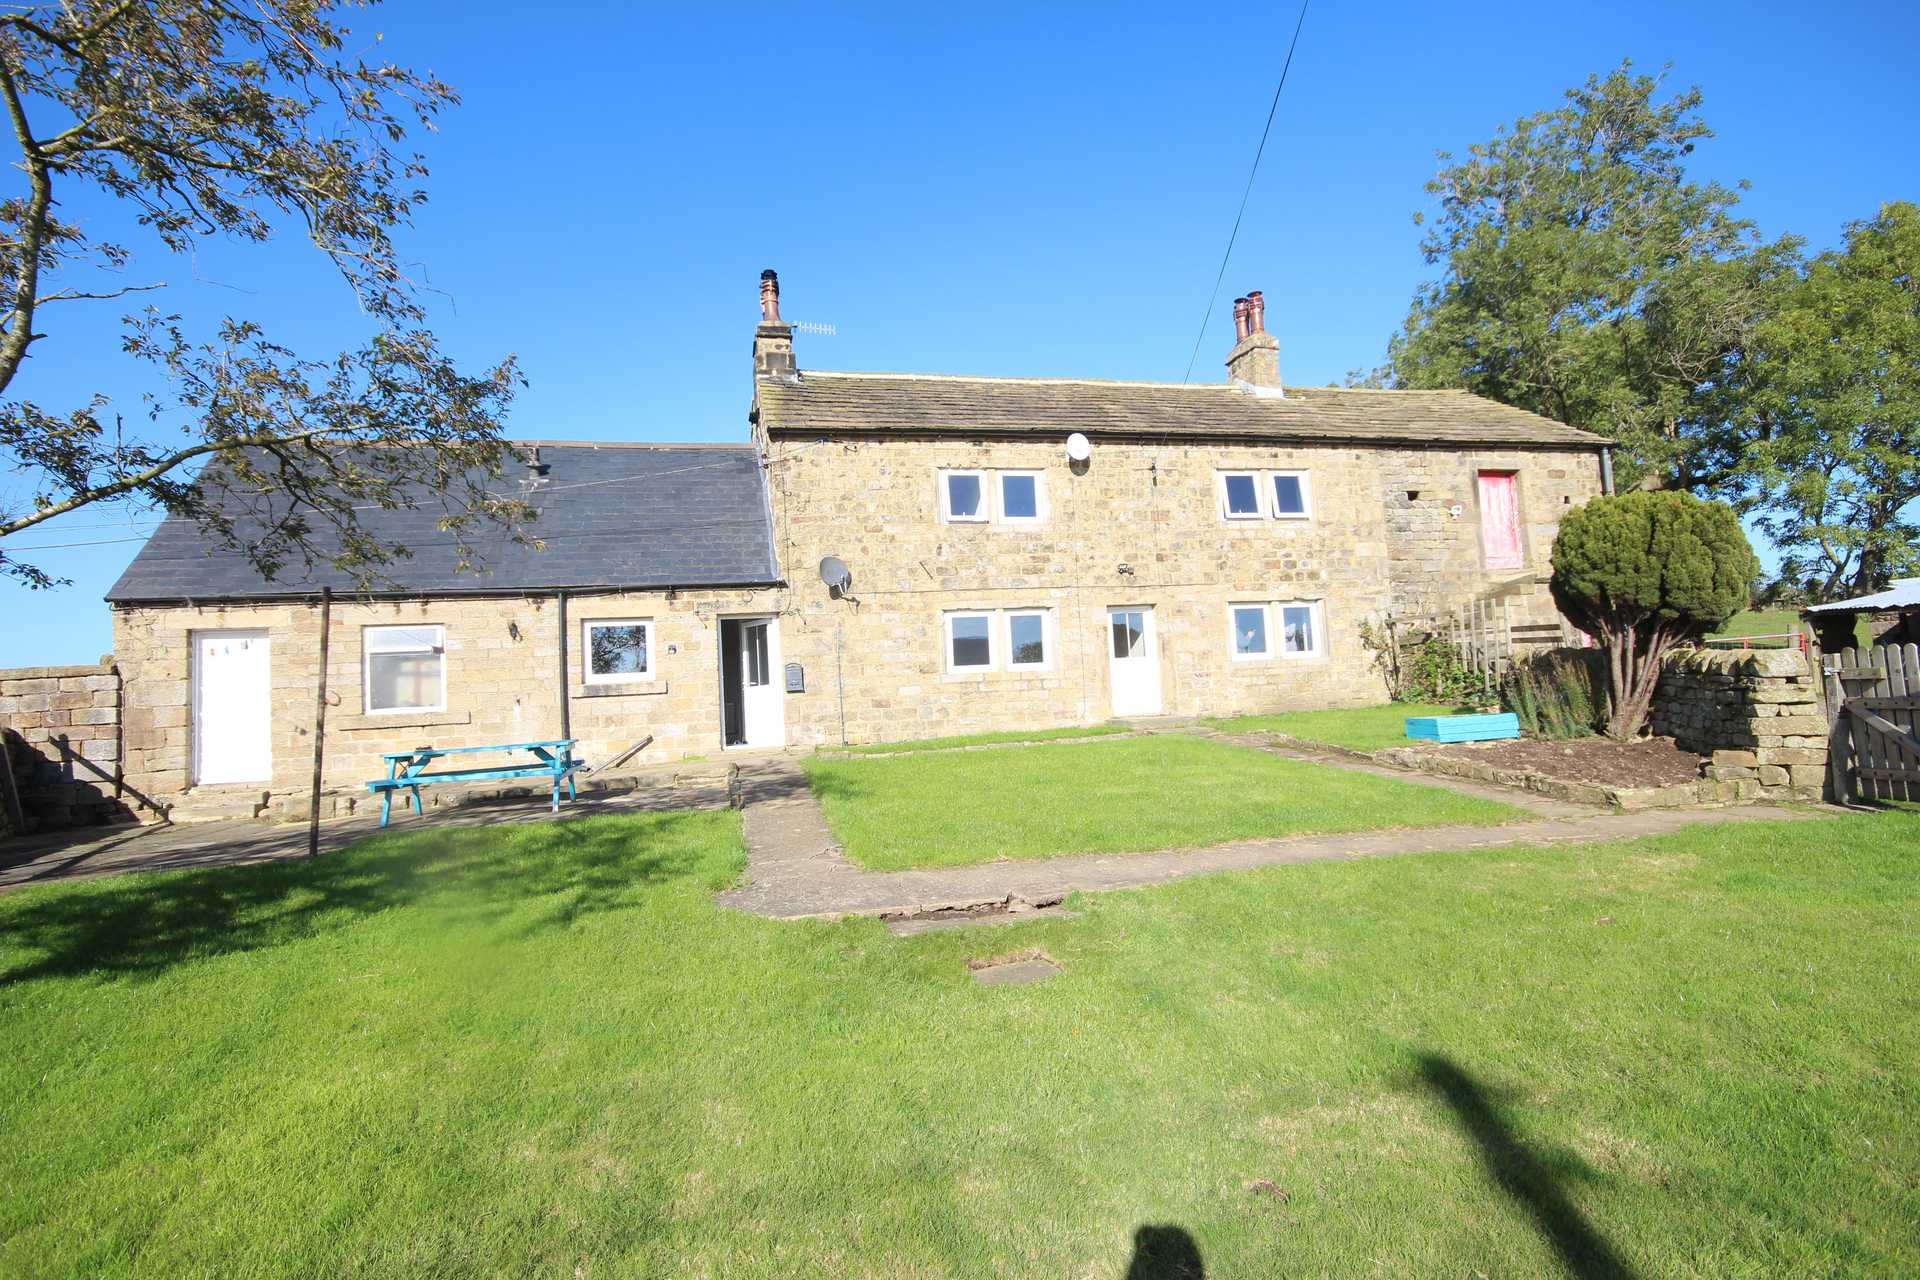 House in Weston, North Yorkshire 10990679